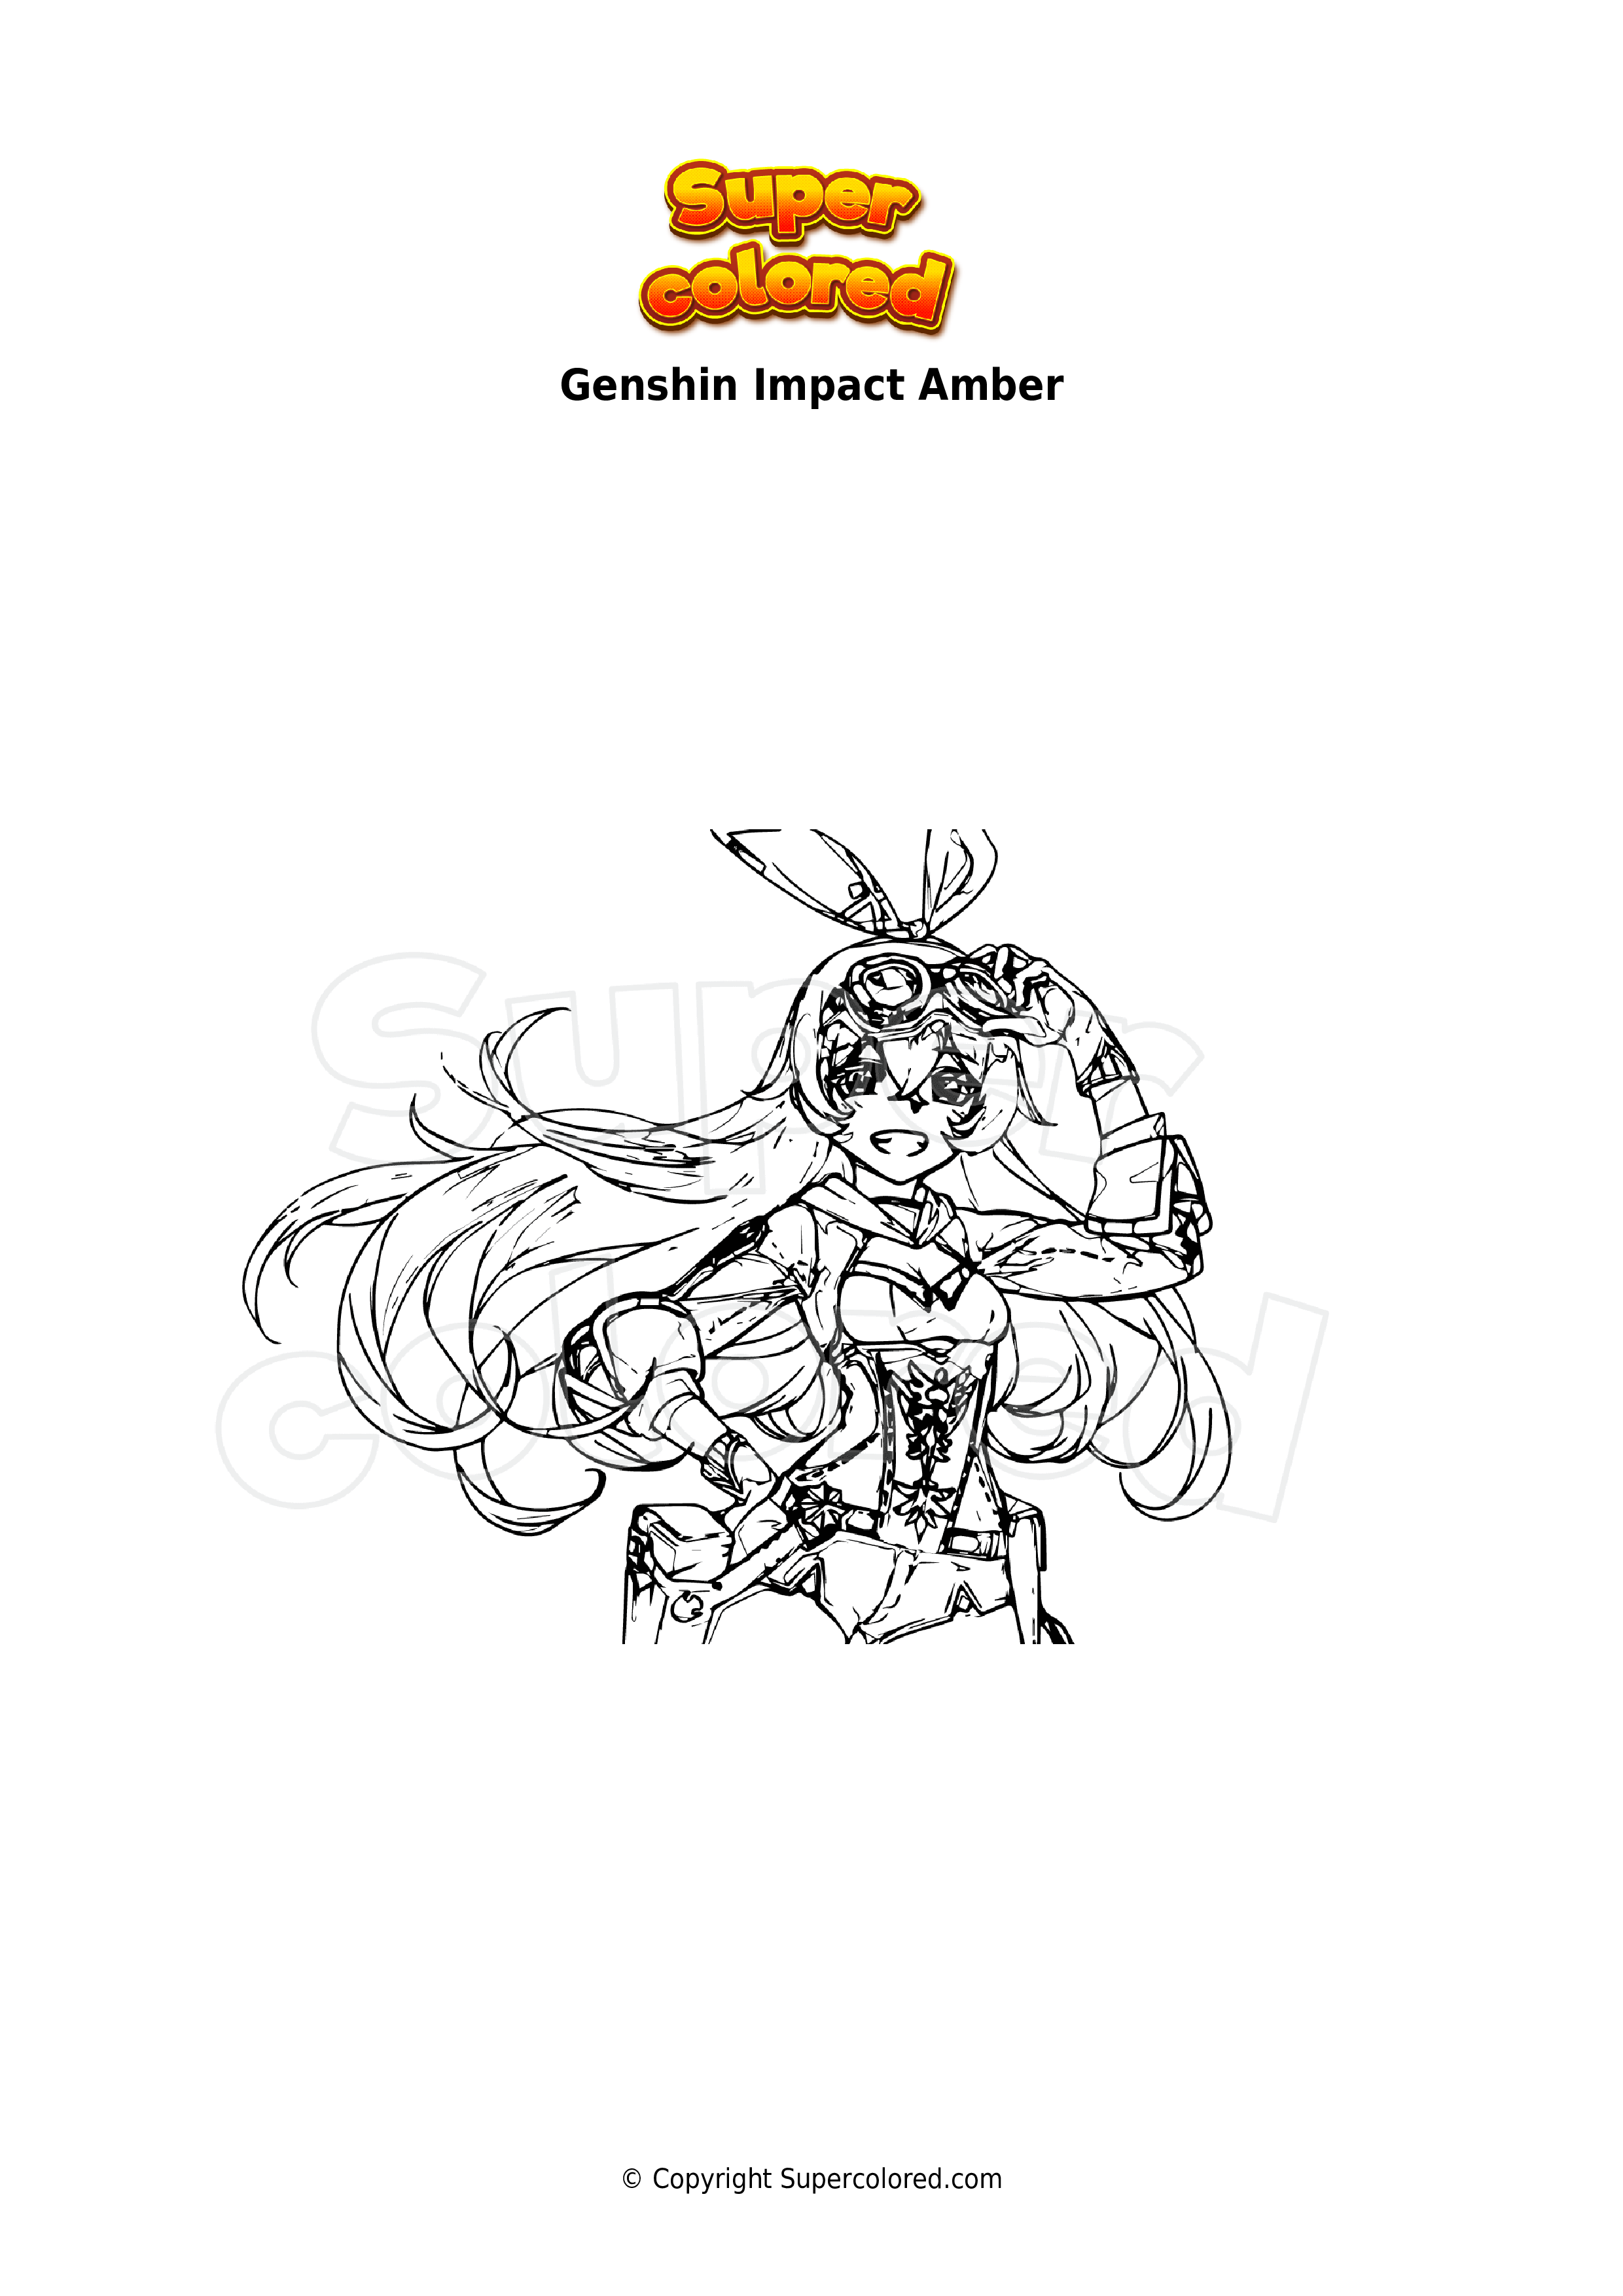 https://images.supercolored.com/coloring-page-genshin-impact-amber_8ea056.png